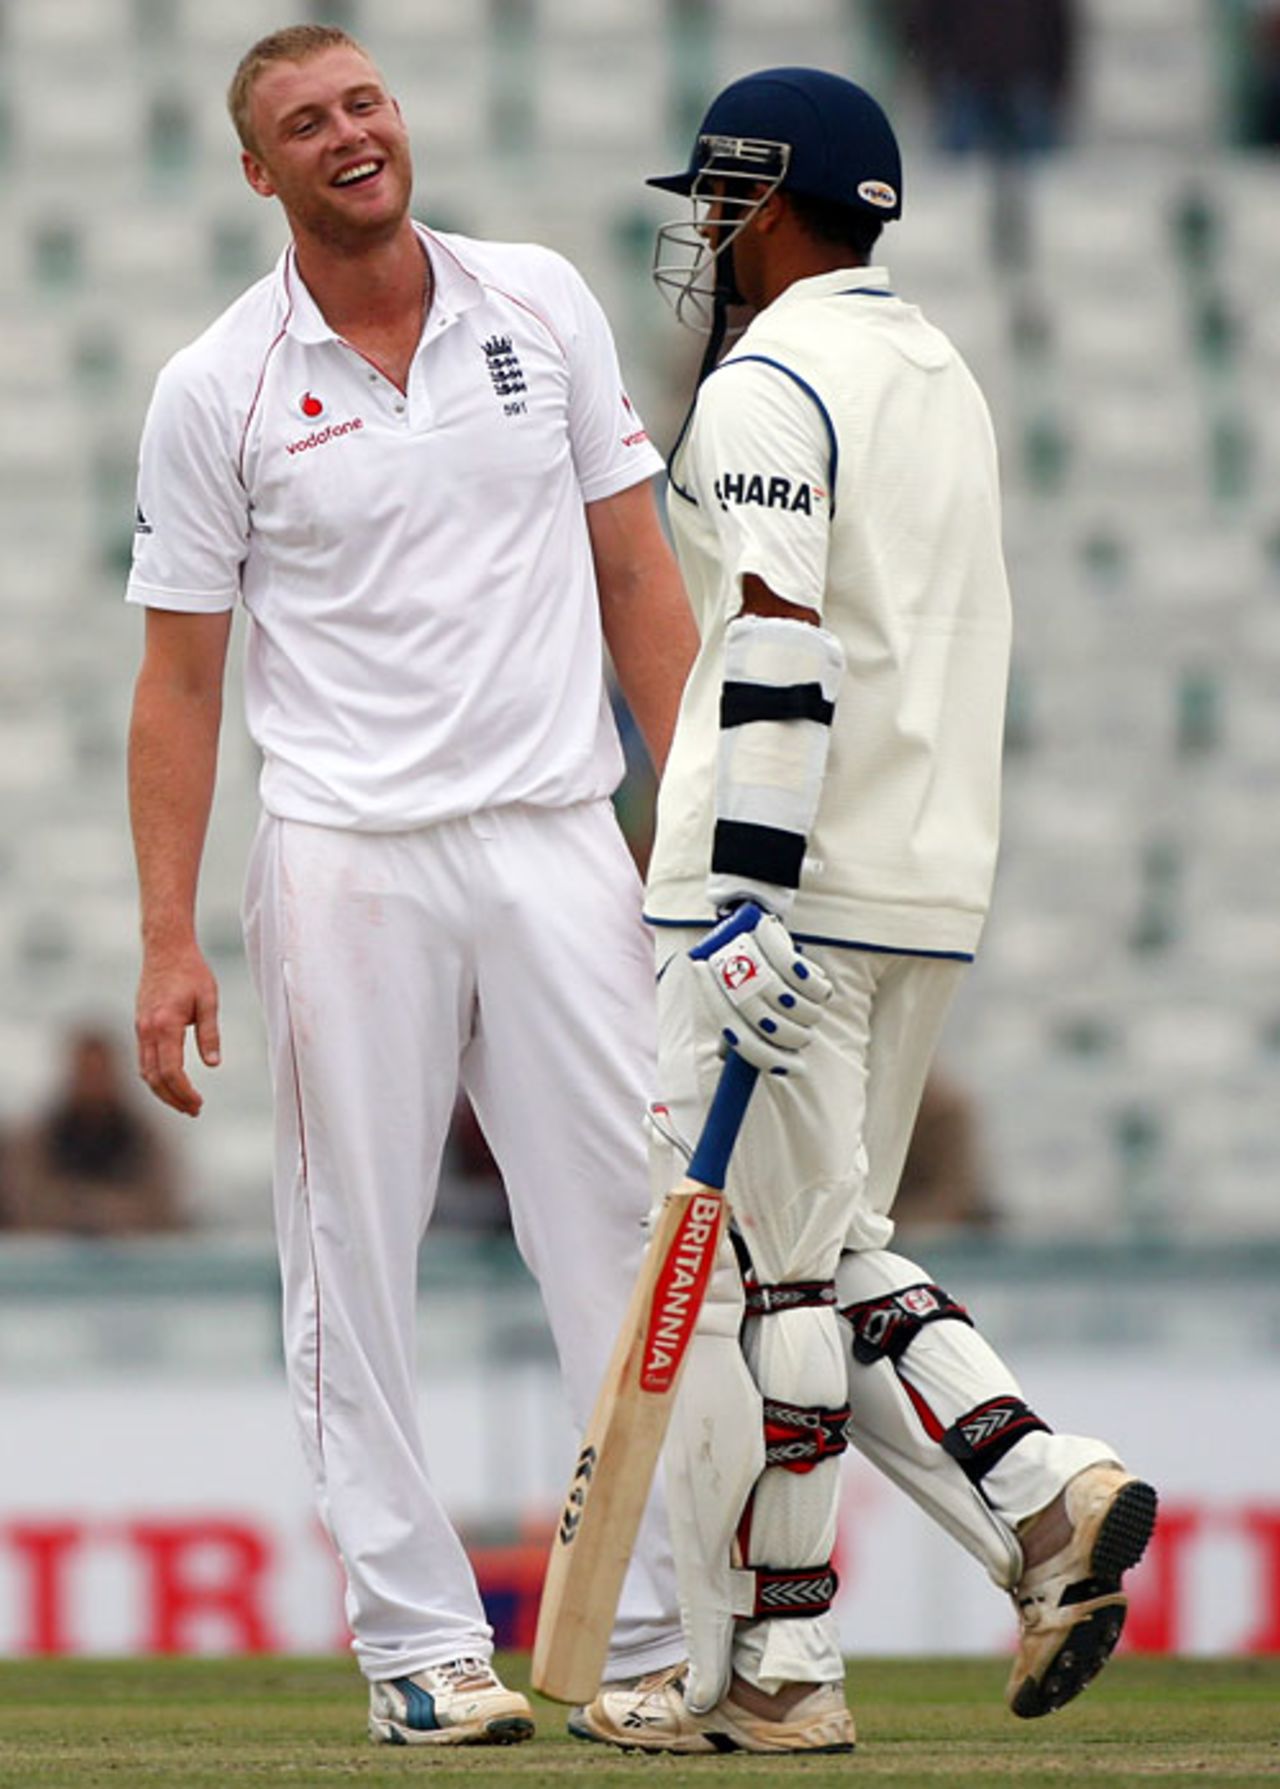 Andrew Flintoff has a word with Rahul Dravid, India v England, 2nd Test, Mohali, 1st day, December 19, 2008